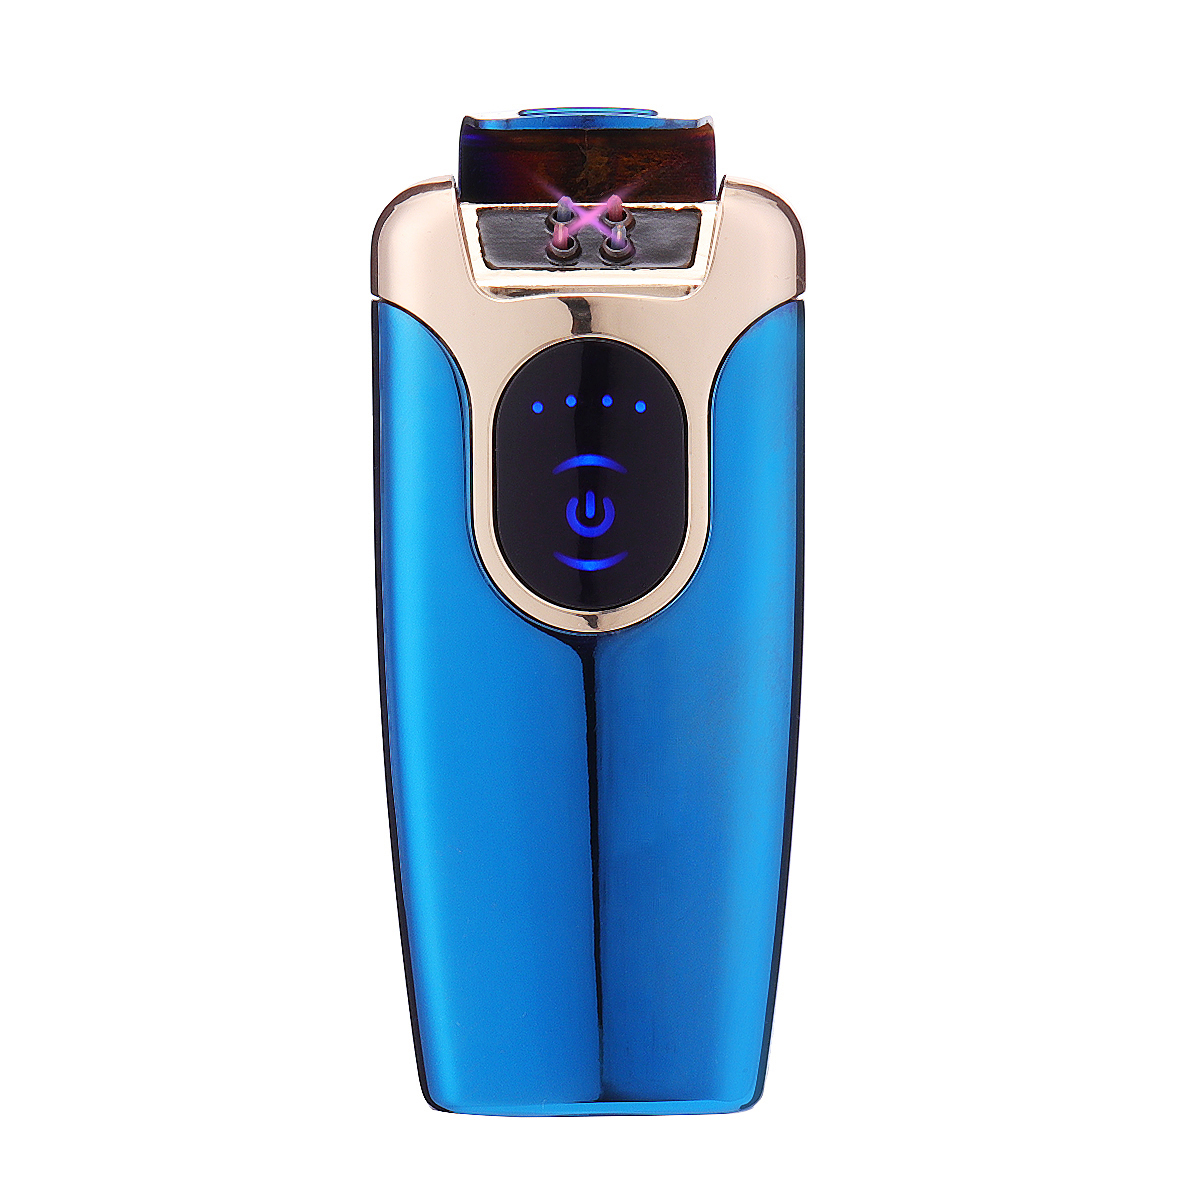 

KCASA KC-801 Double Arc Touch Screen Inductive Lighter LED Power Display Electric USB Lighter Windproof